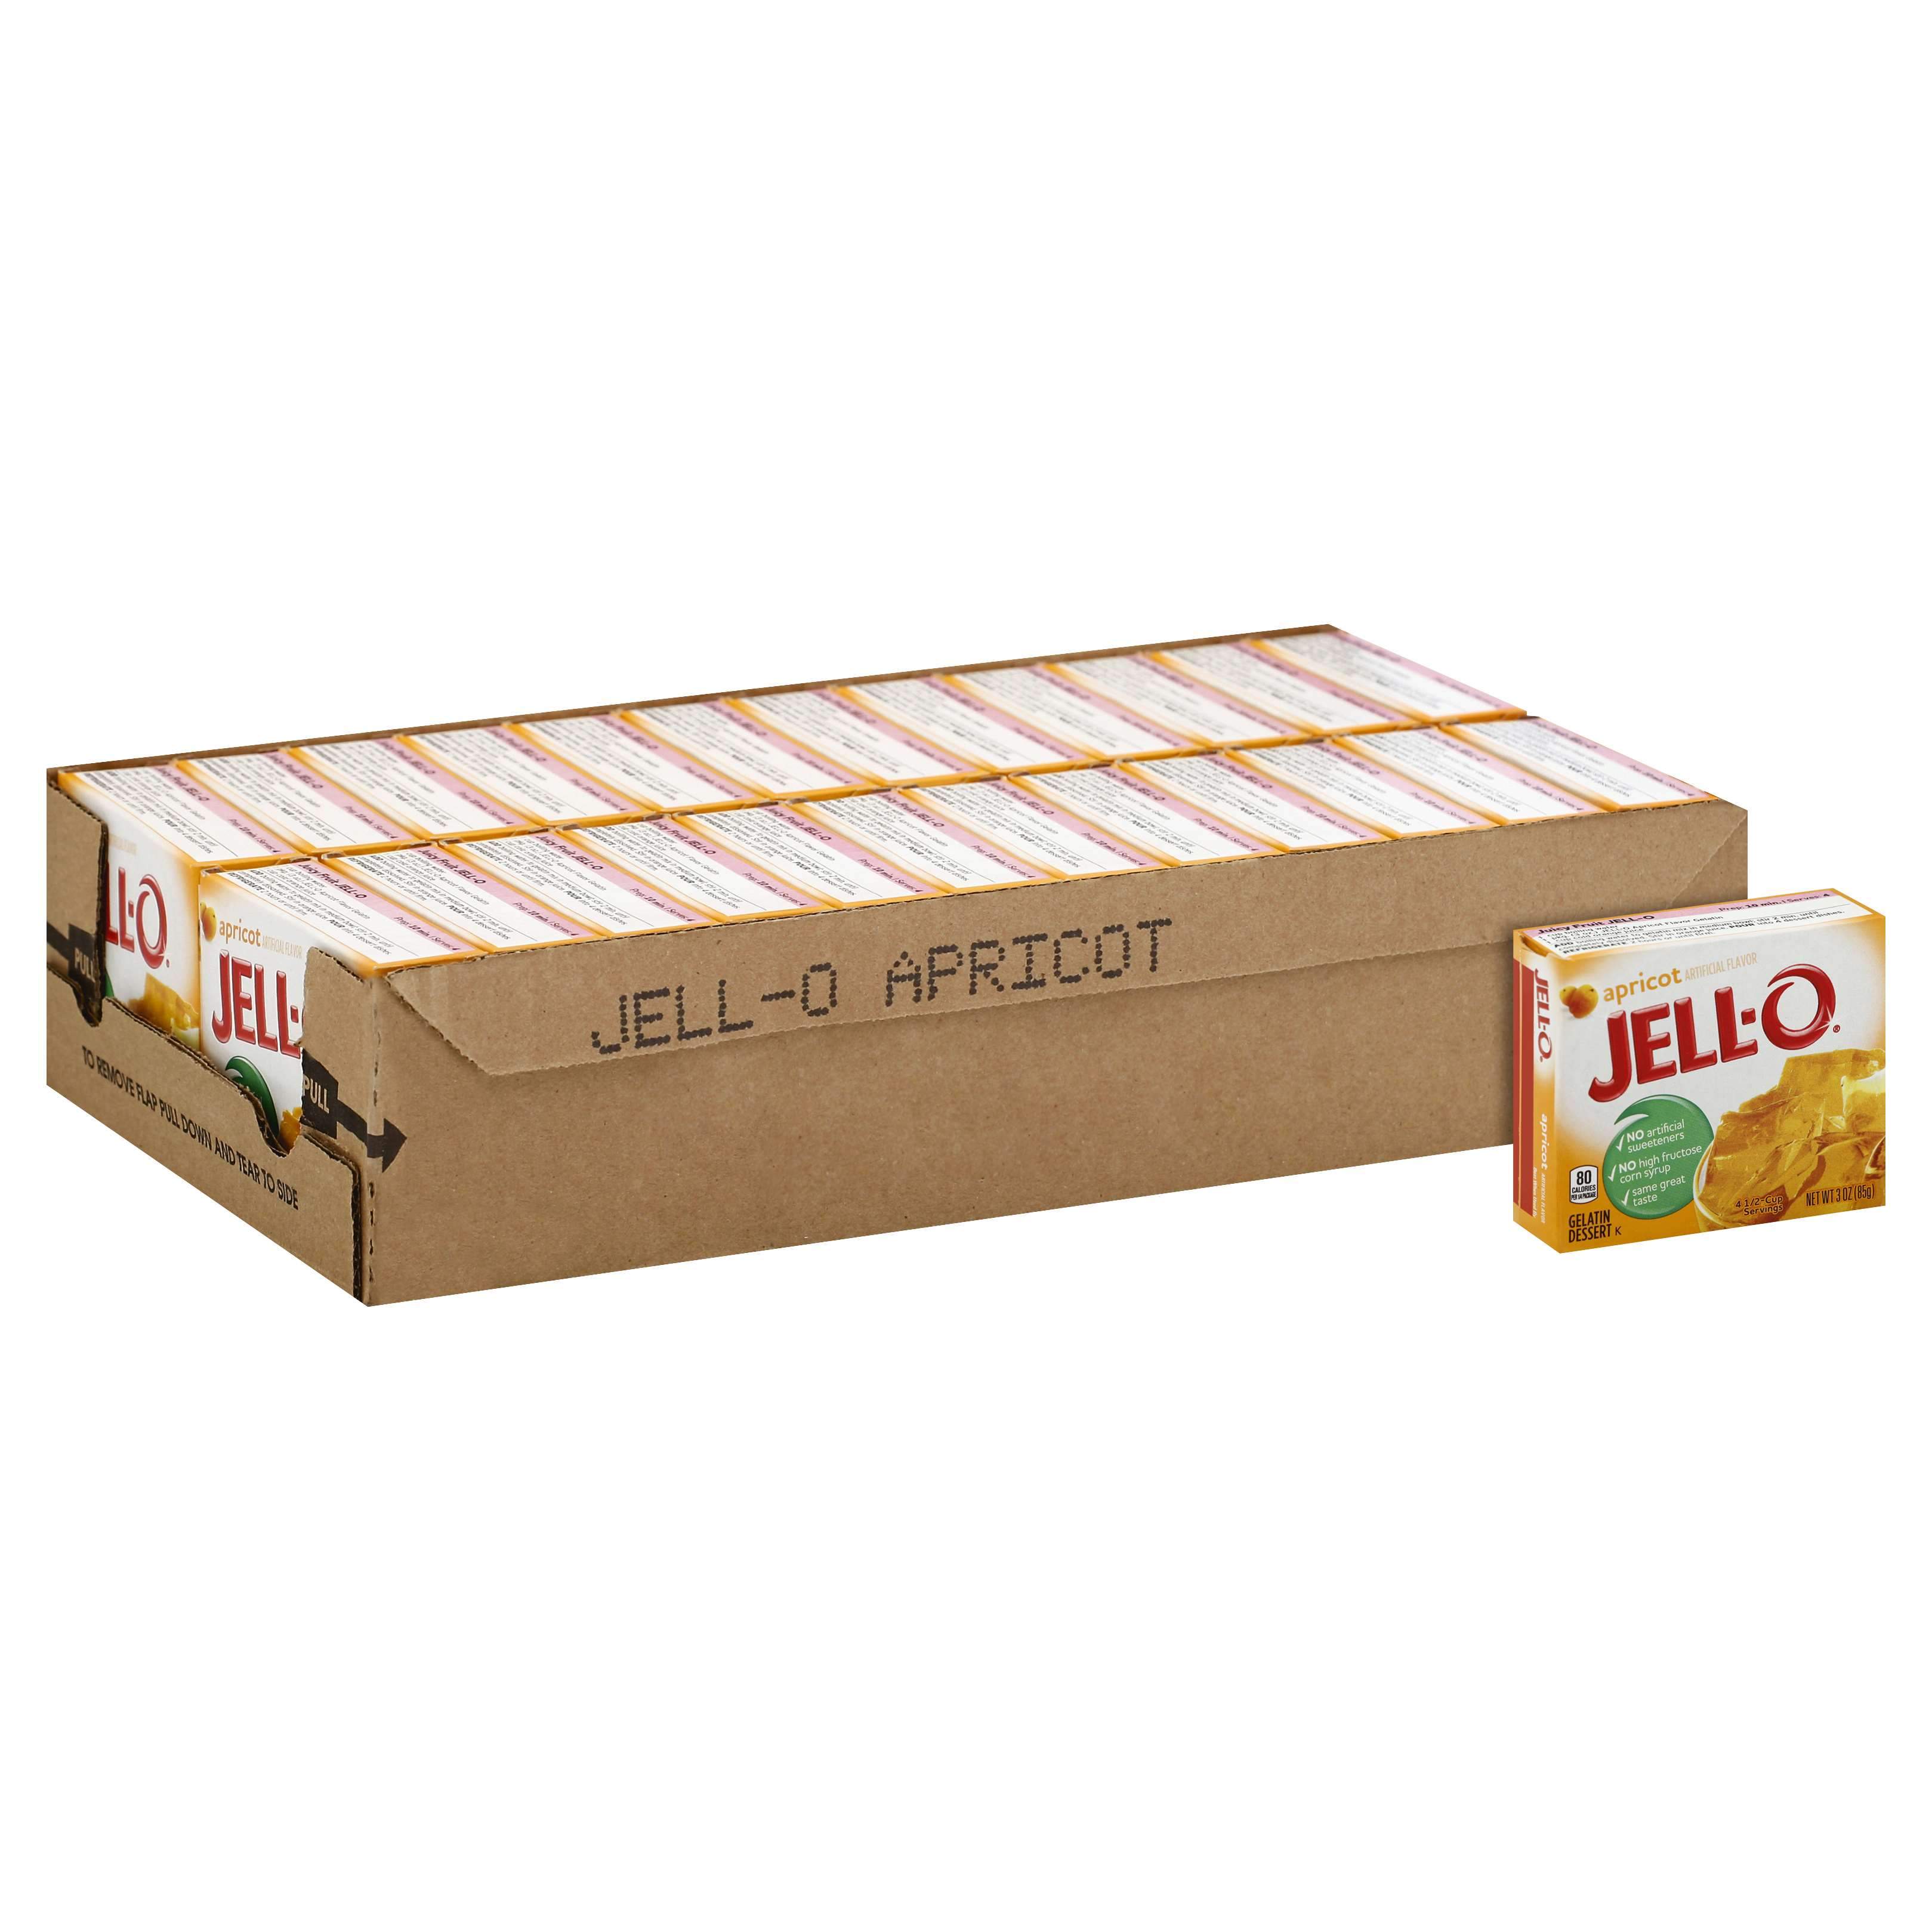 Jell-O Gelatin Mix Jell-O Apricot 3 Oz-24 Count 